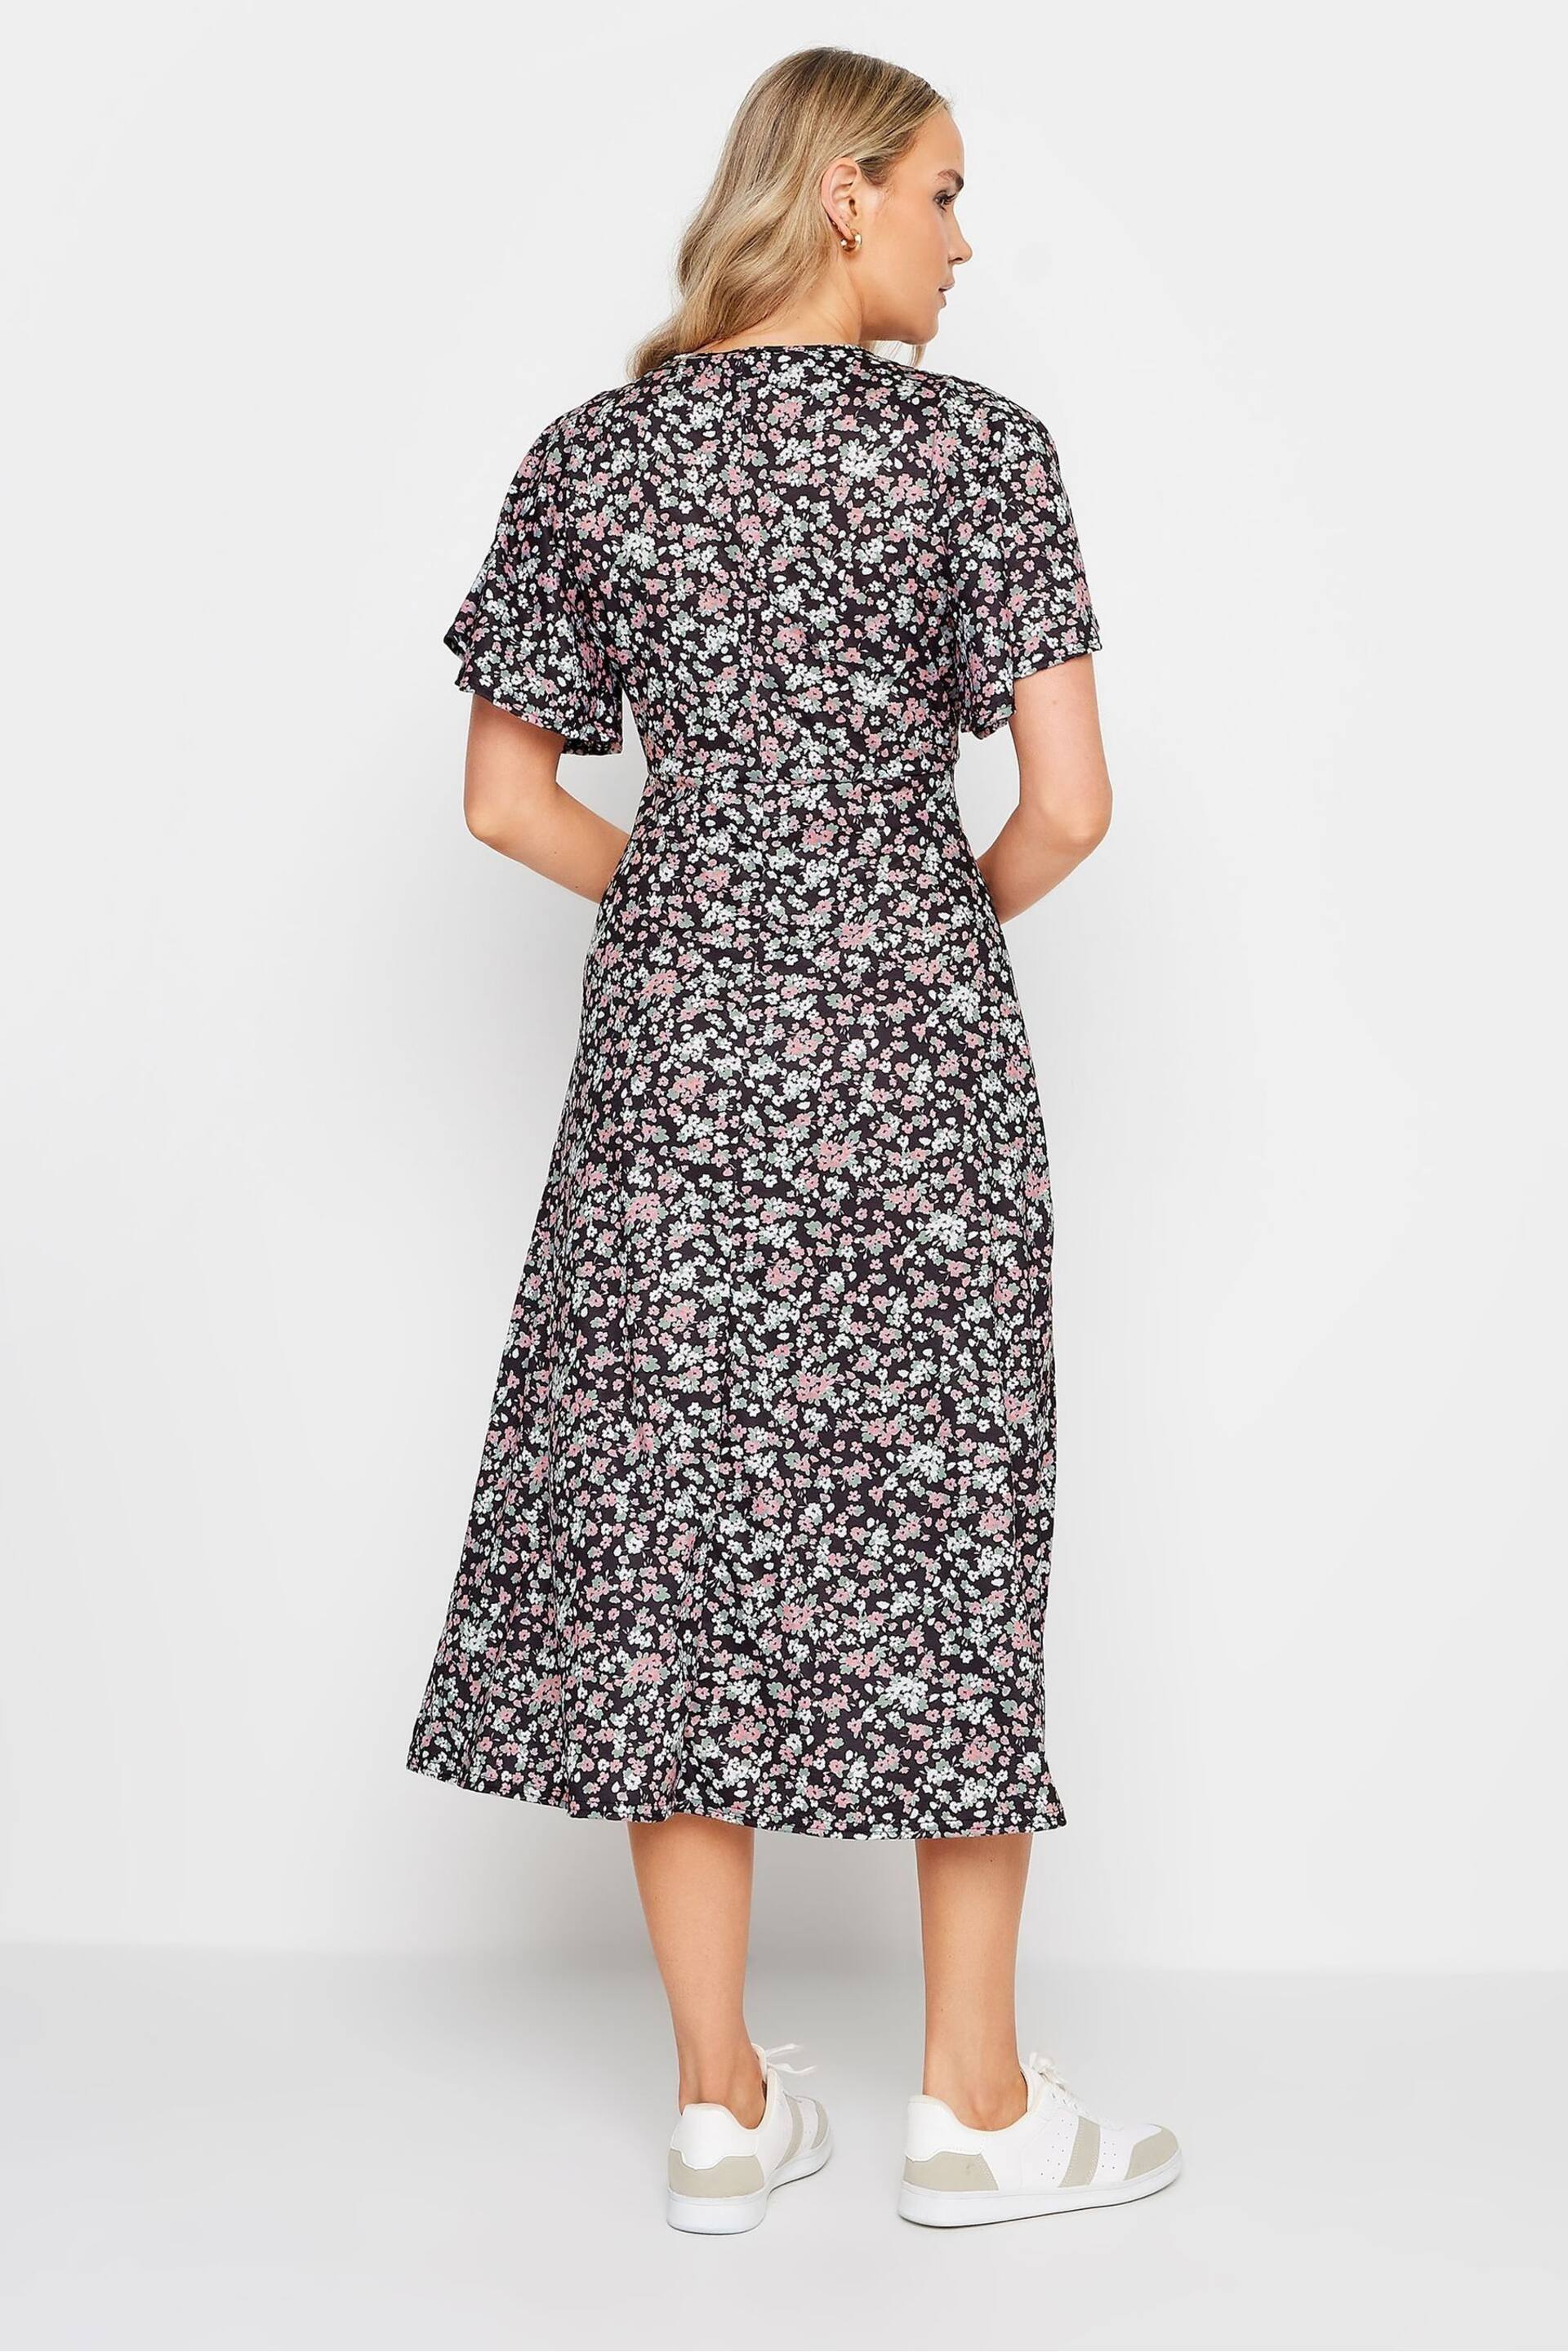 Long Tall Sally Multi Tall Ditsy Floral Midi Dress - Image 3 of 5